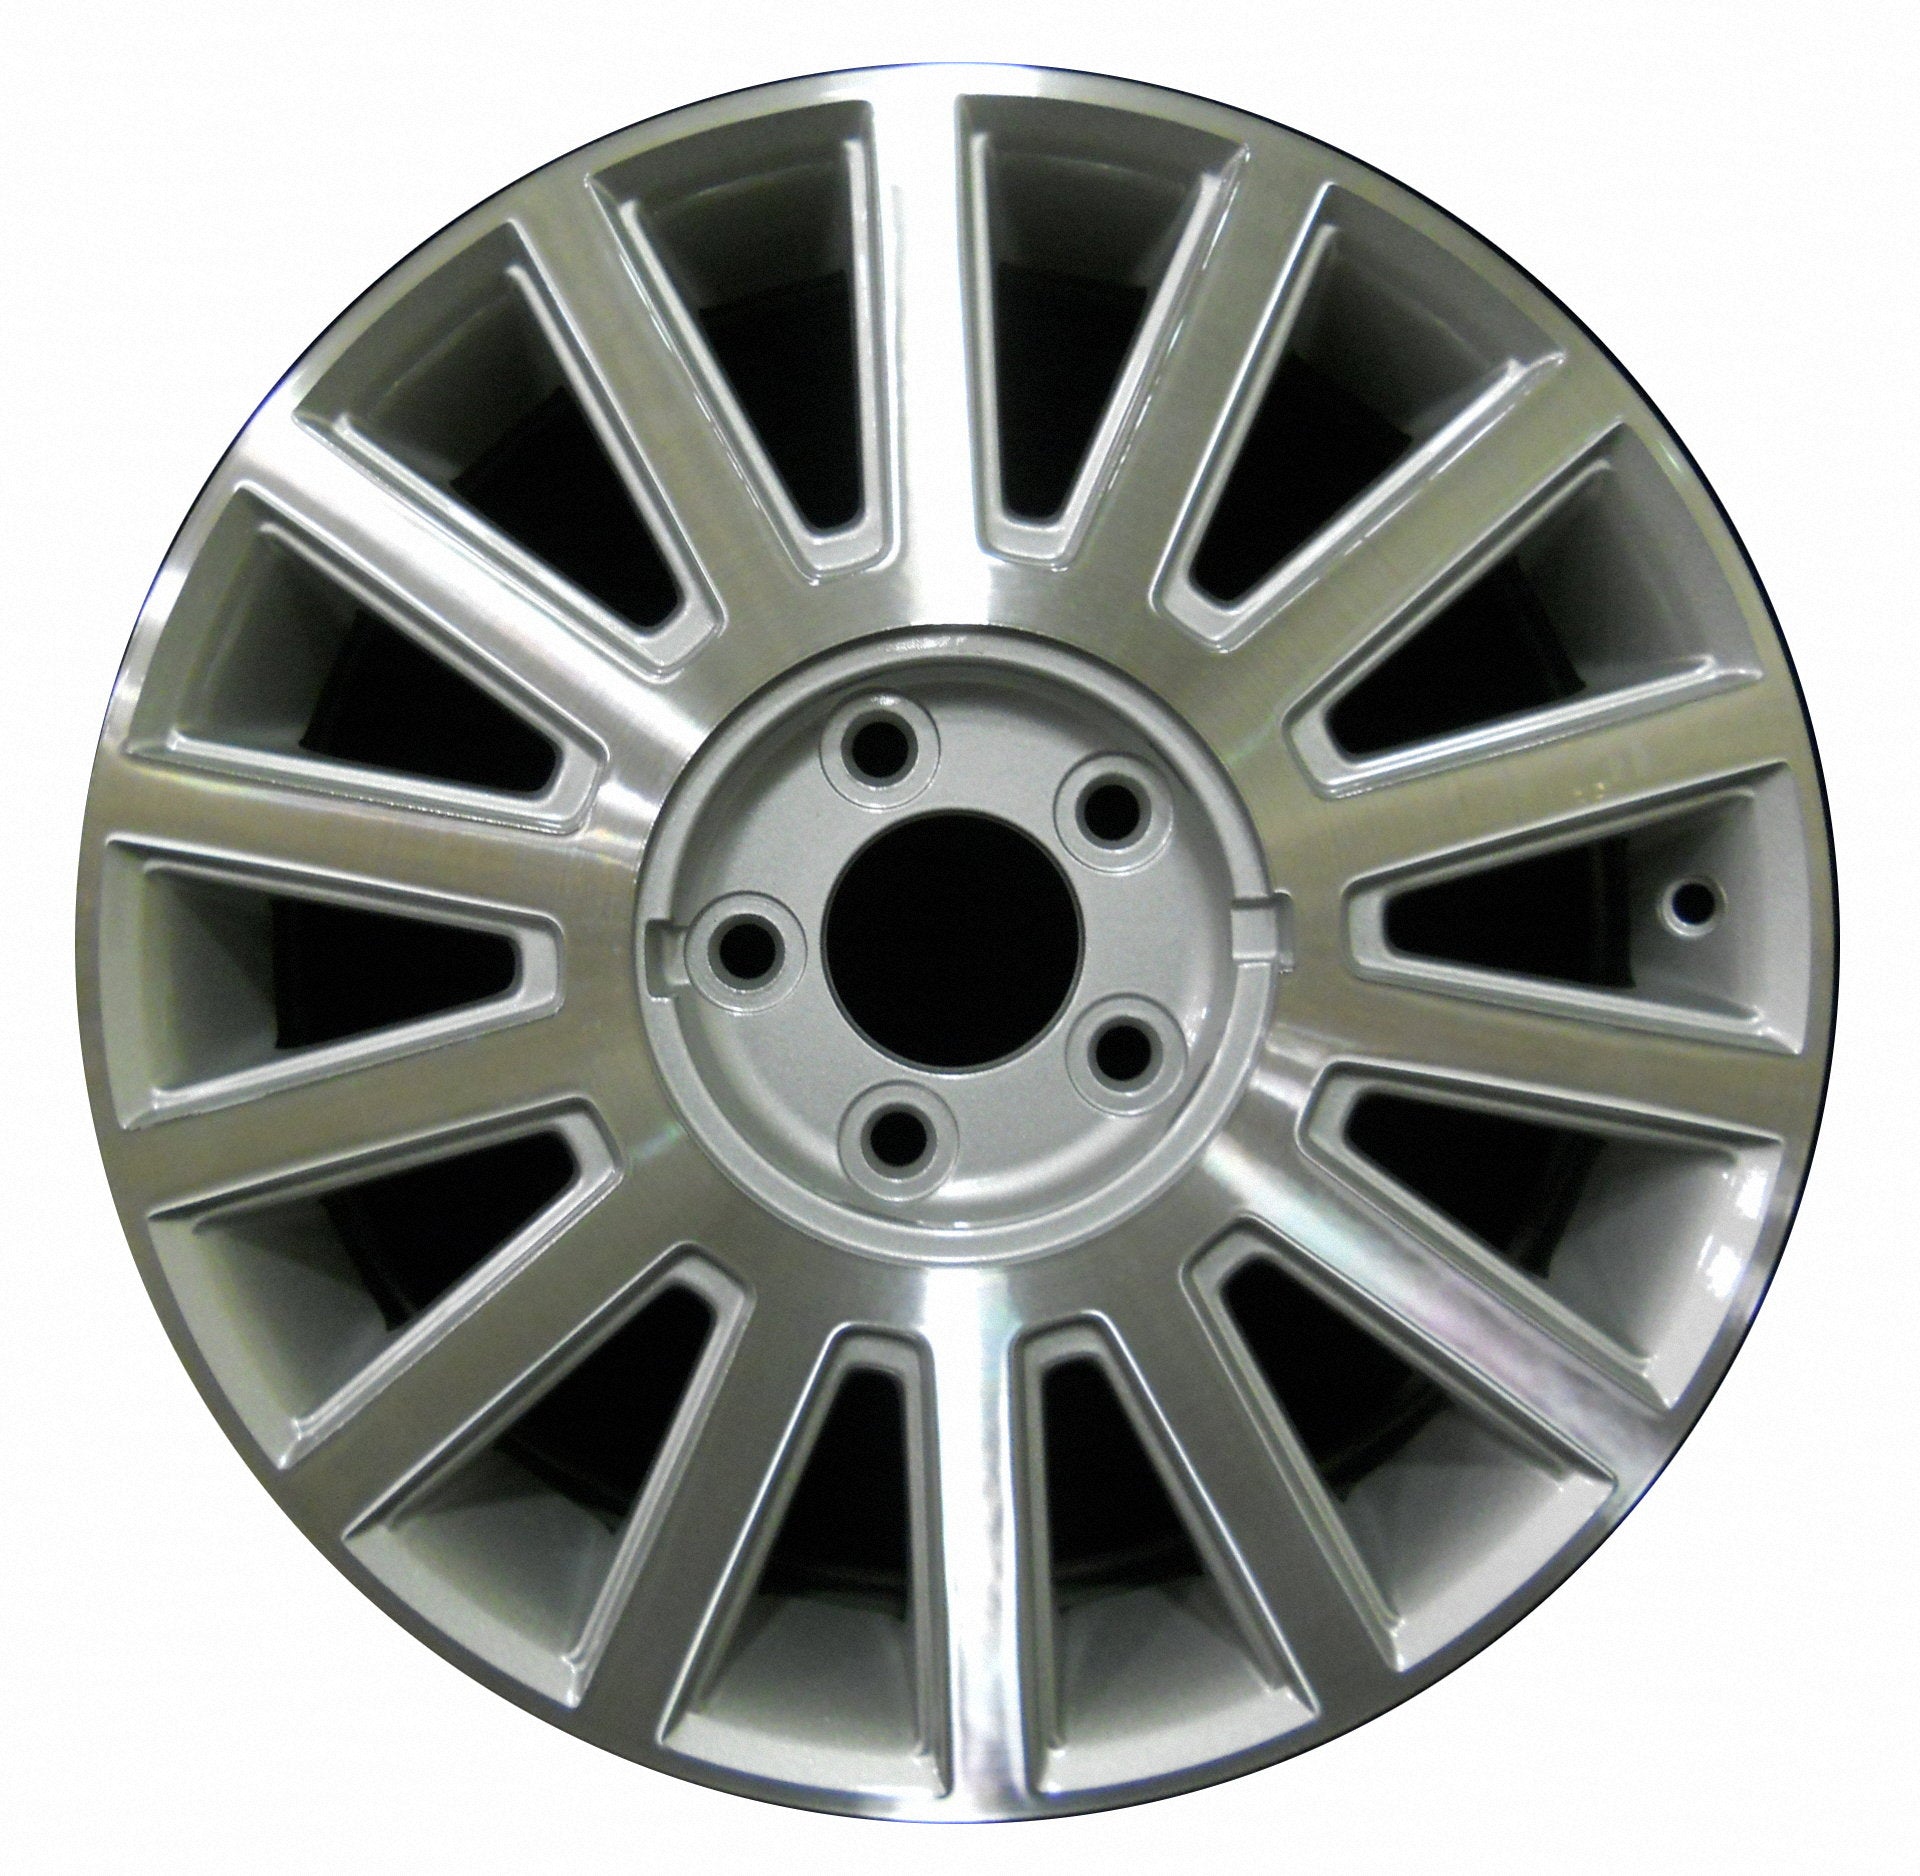 Lincoln Town Car  2003, 2004, 2005 Factory OEM Car Wheel Size 17x7 Alloy WAO.3504A.PS02.MA